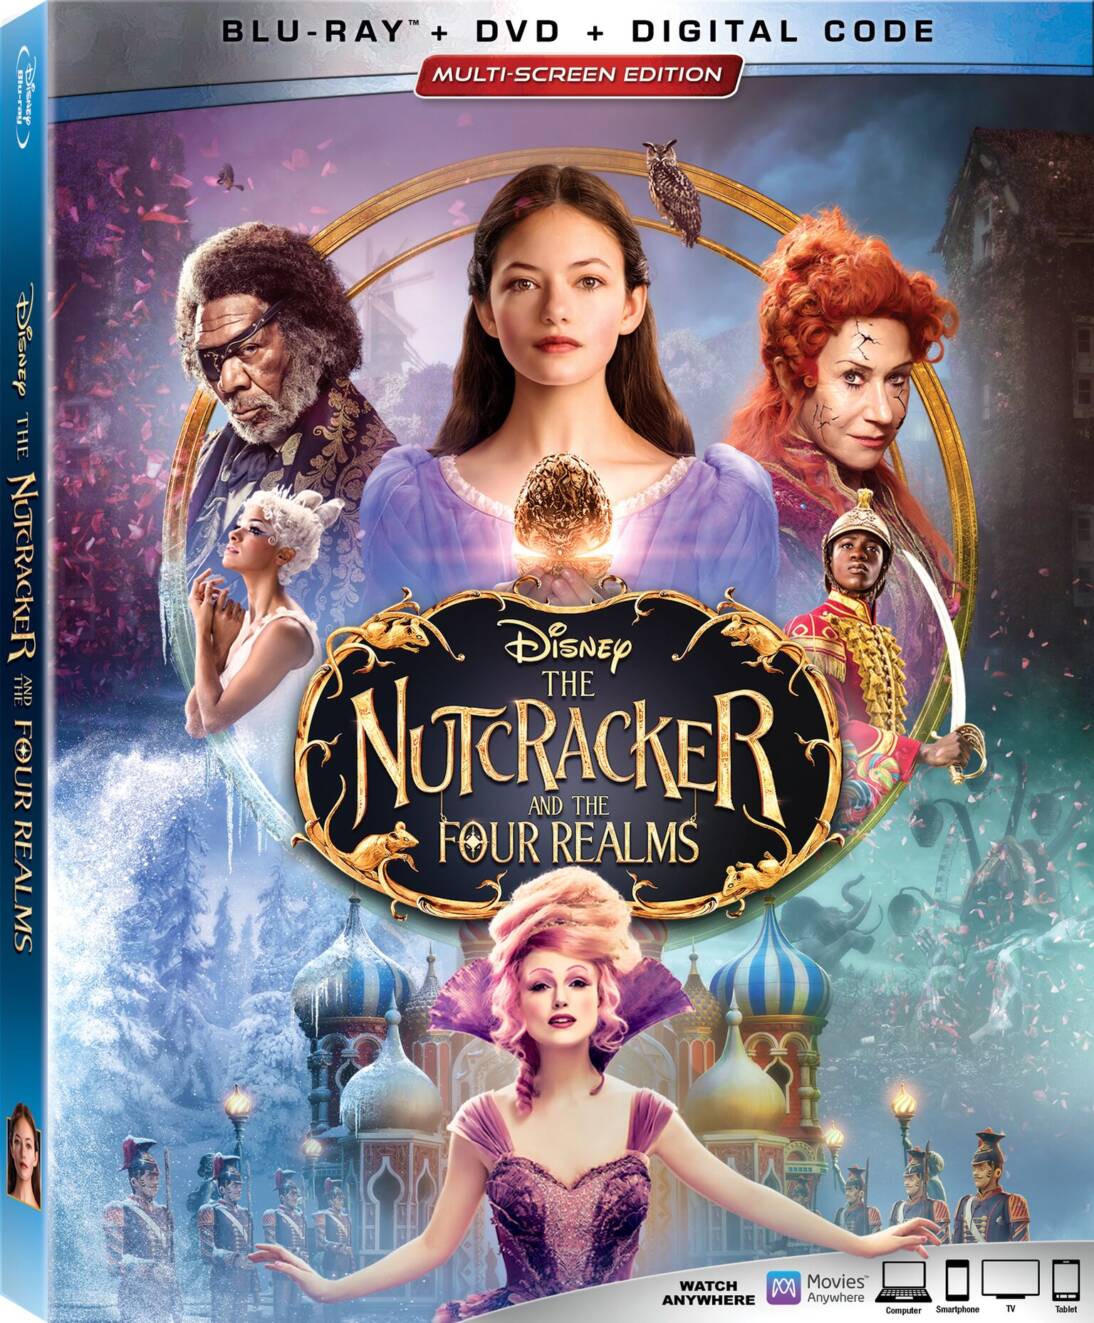 The Nutcracker and the Four Realms arrives on Digital, Movies Anywhere, 4K Ultra HD, Blu-ray & DVD